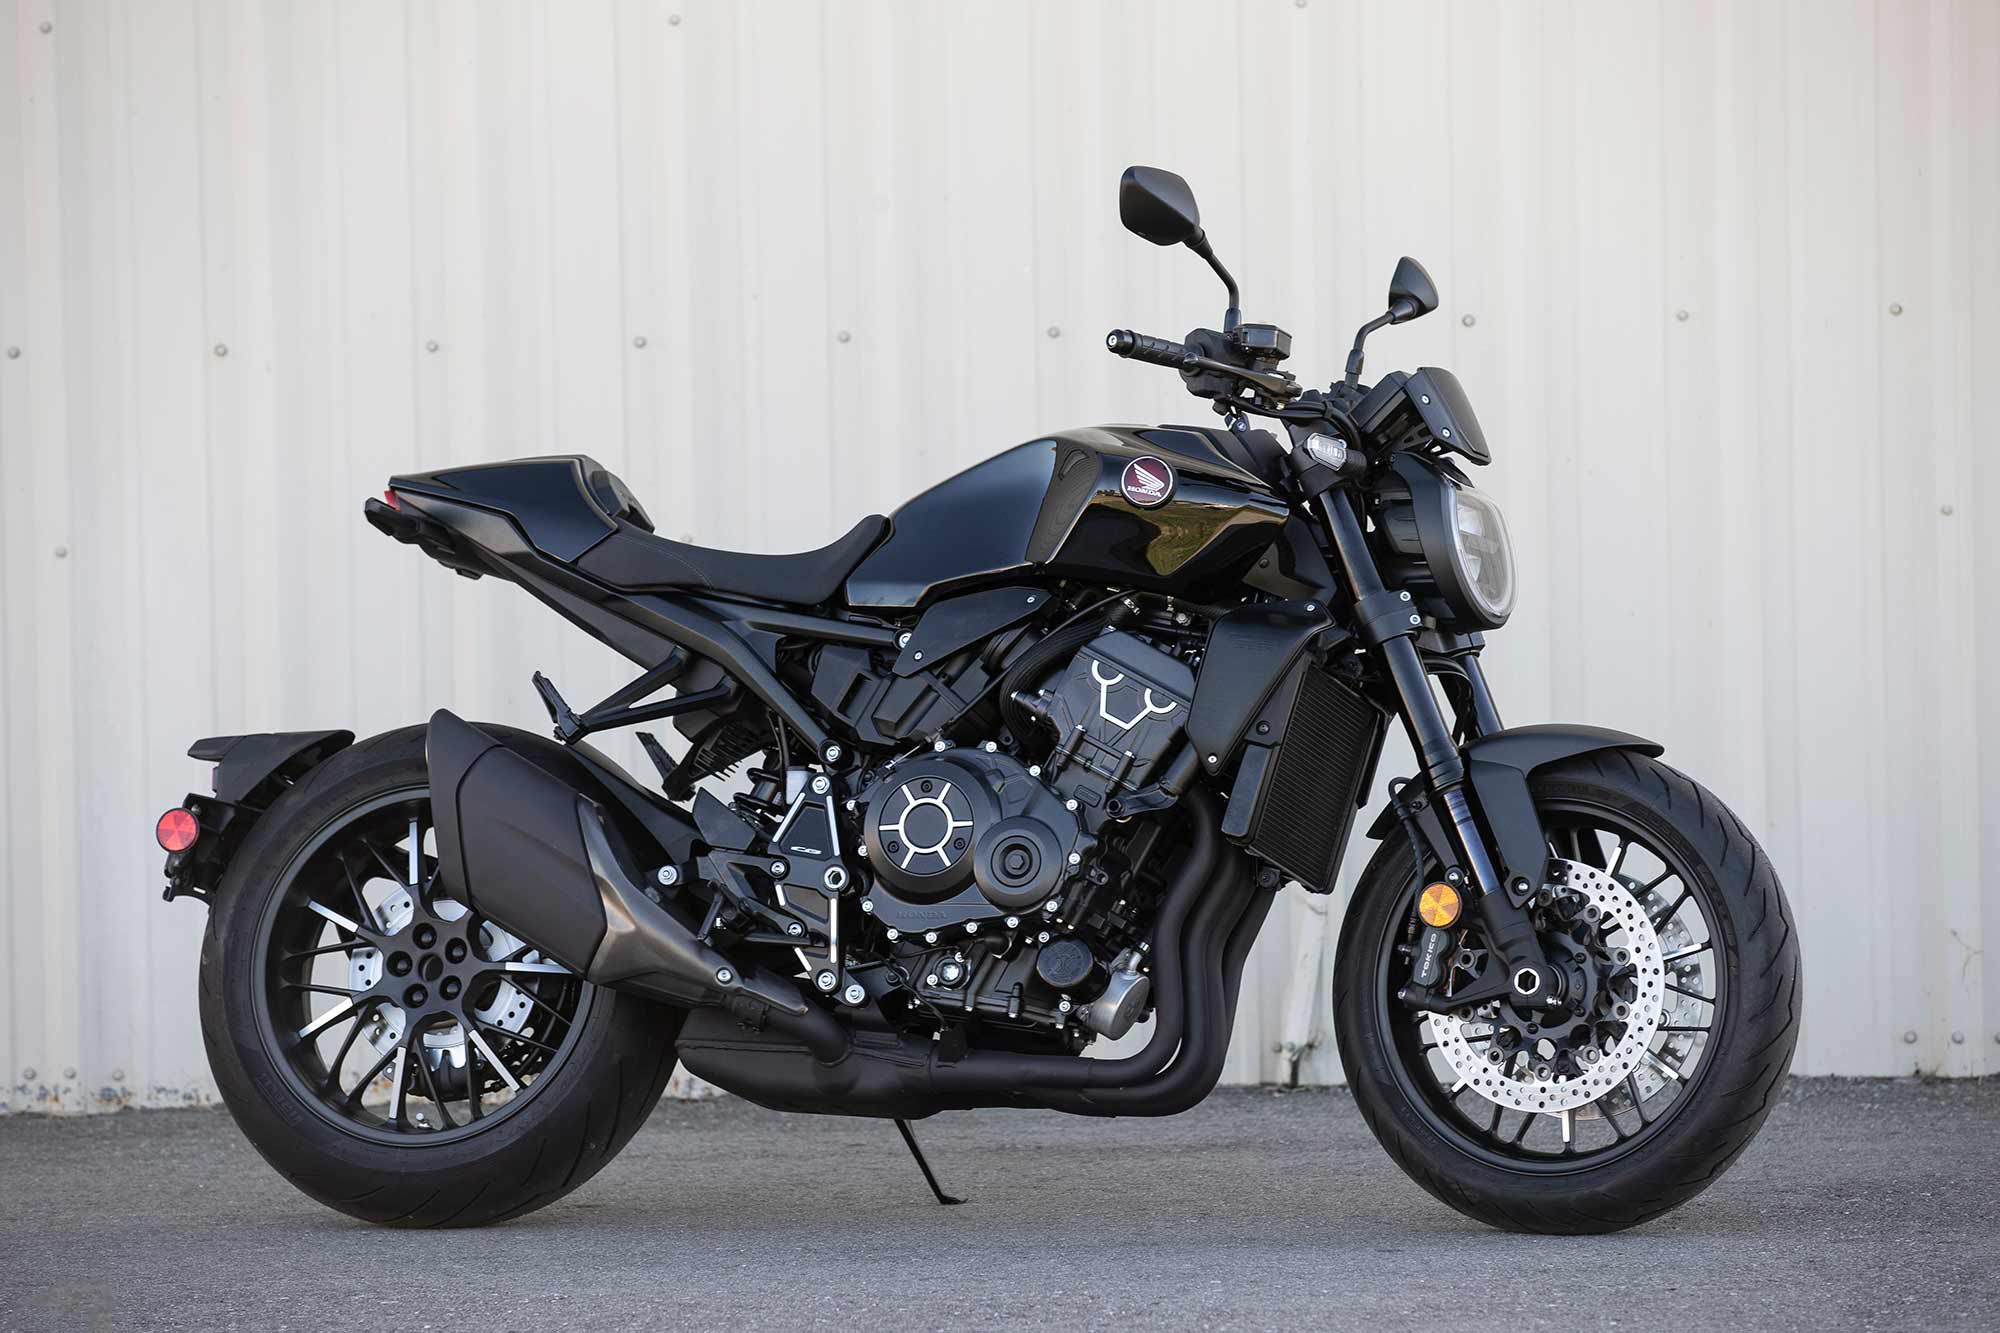 The Black Edition is visually a stunner, adding to the already high-end fit and finish of Honda products. The best part? MSRP remains at $12,999.